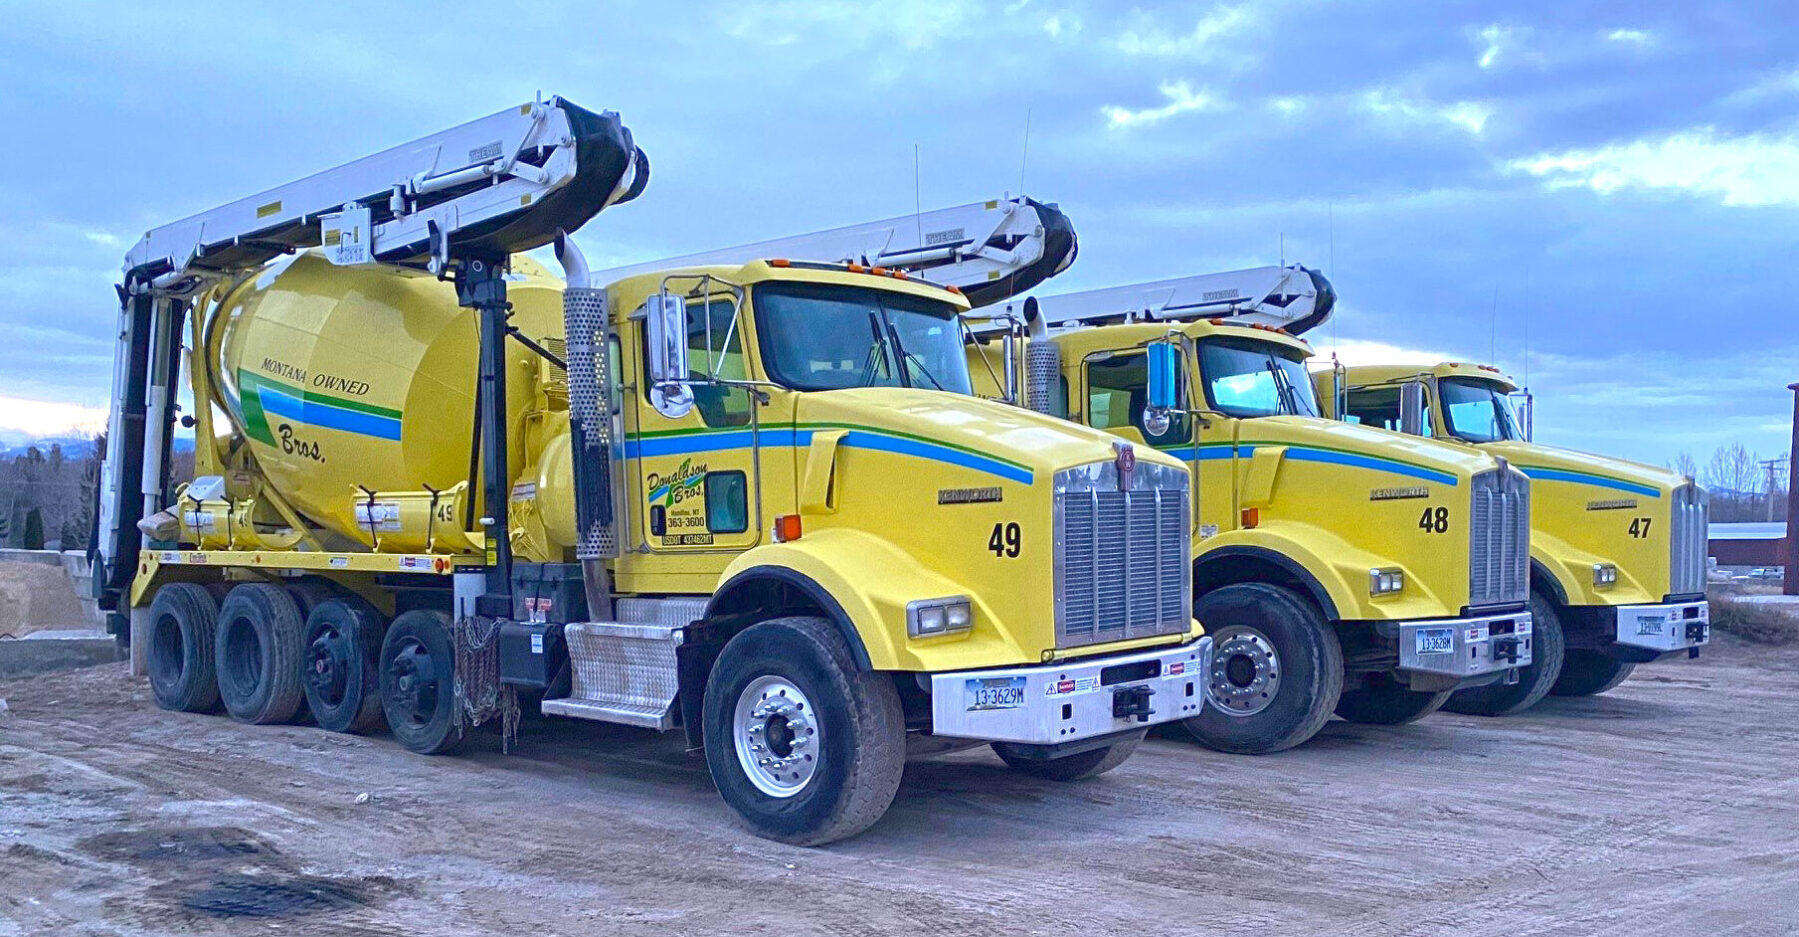 Three yellow cement trucks parked next to each other.